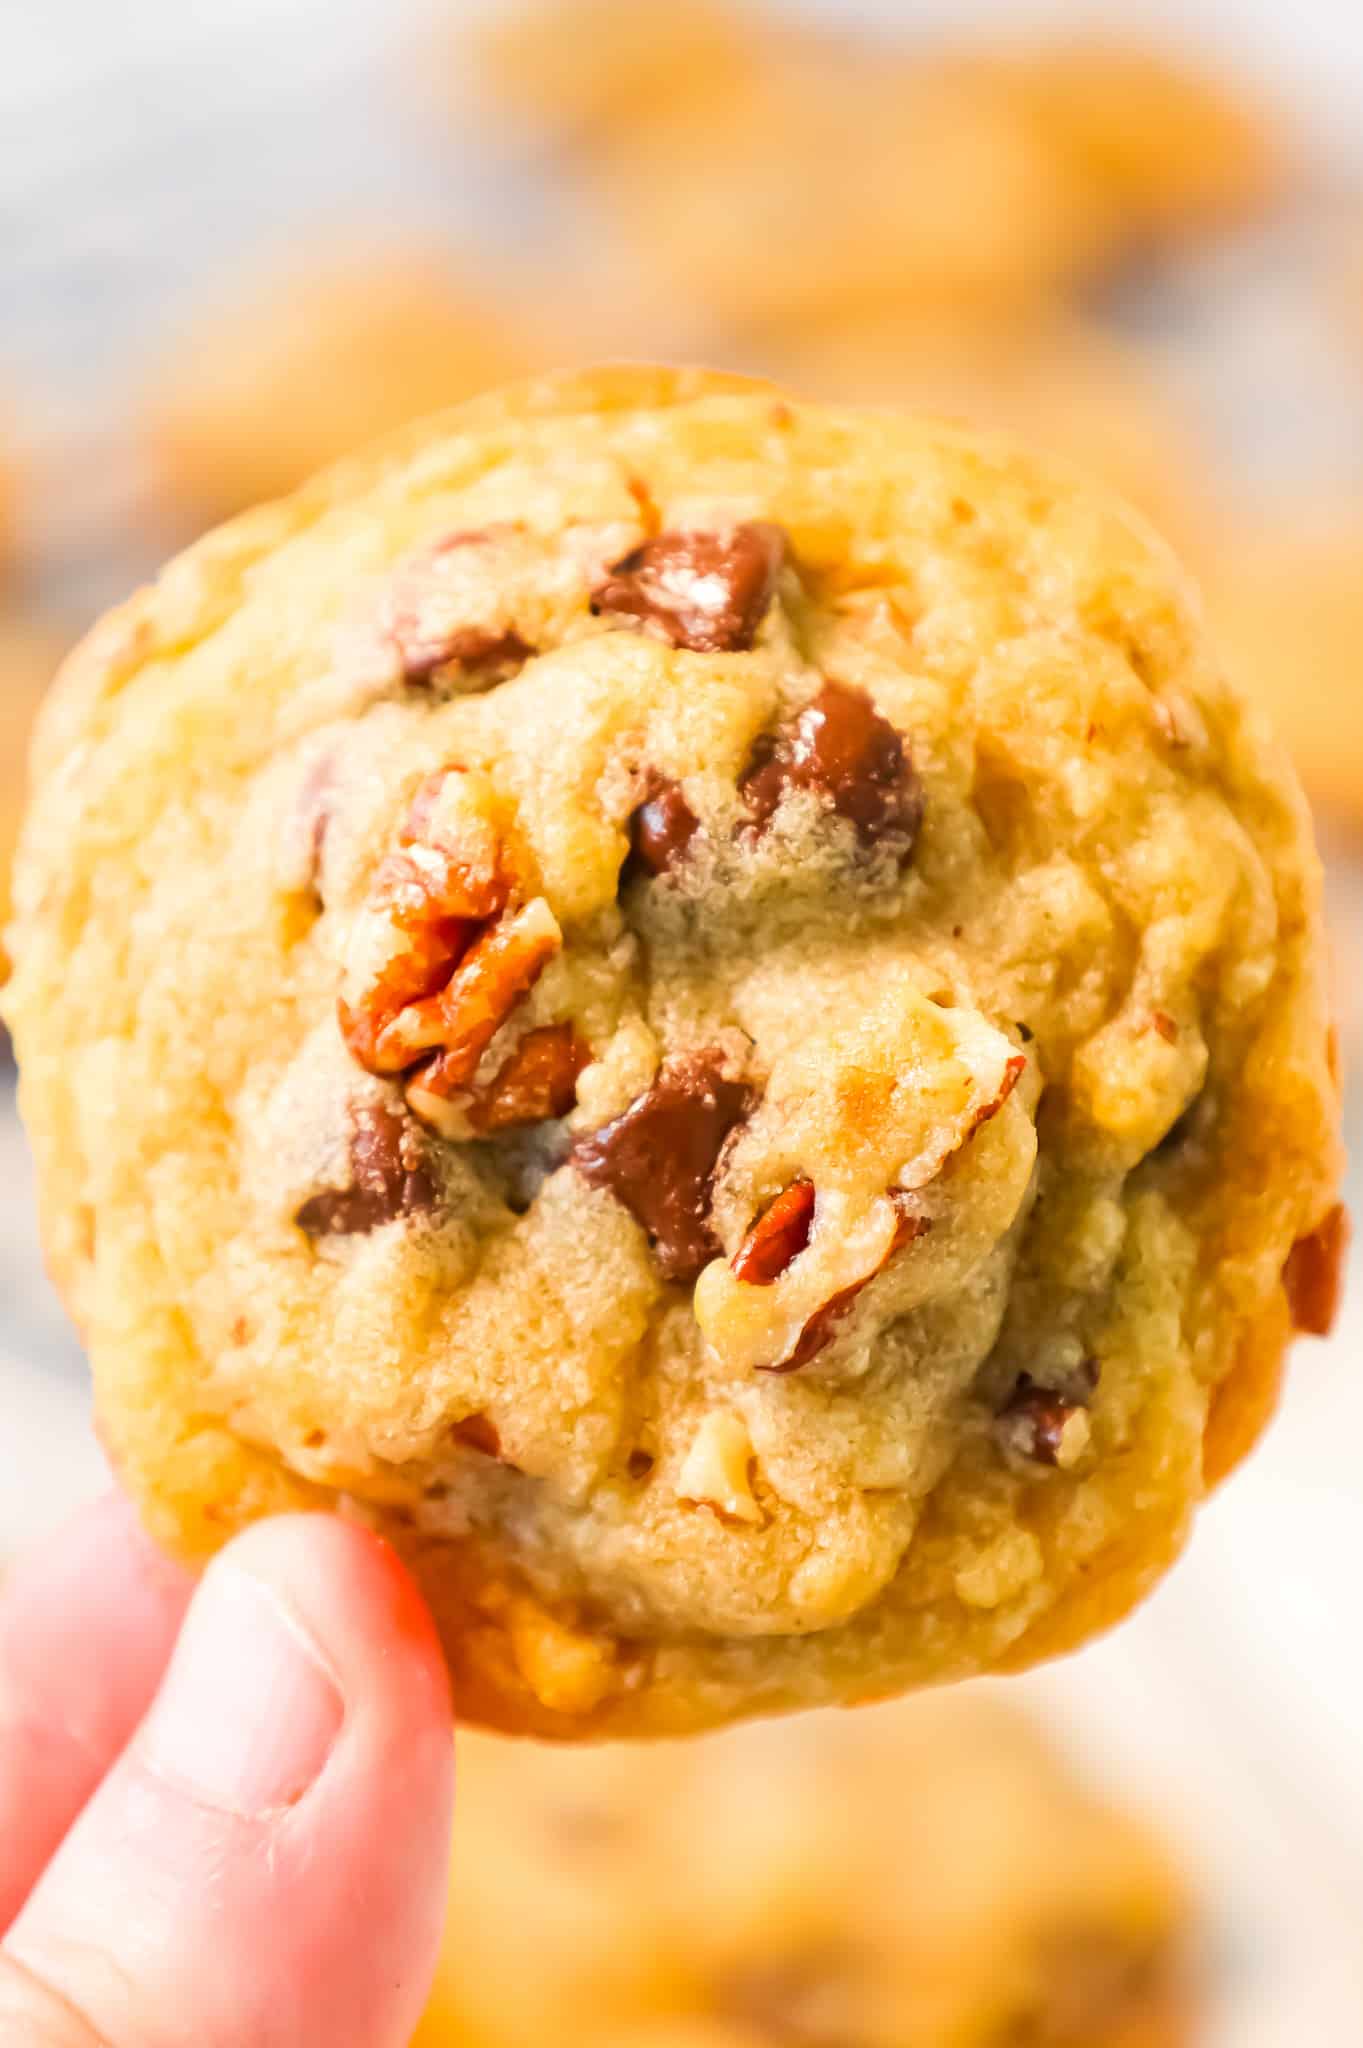 Chocolate Chip Pecan Cookies are delicious chewy cookies loaded with semi sweet chocolate chips and chopped pecans.